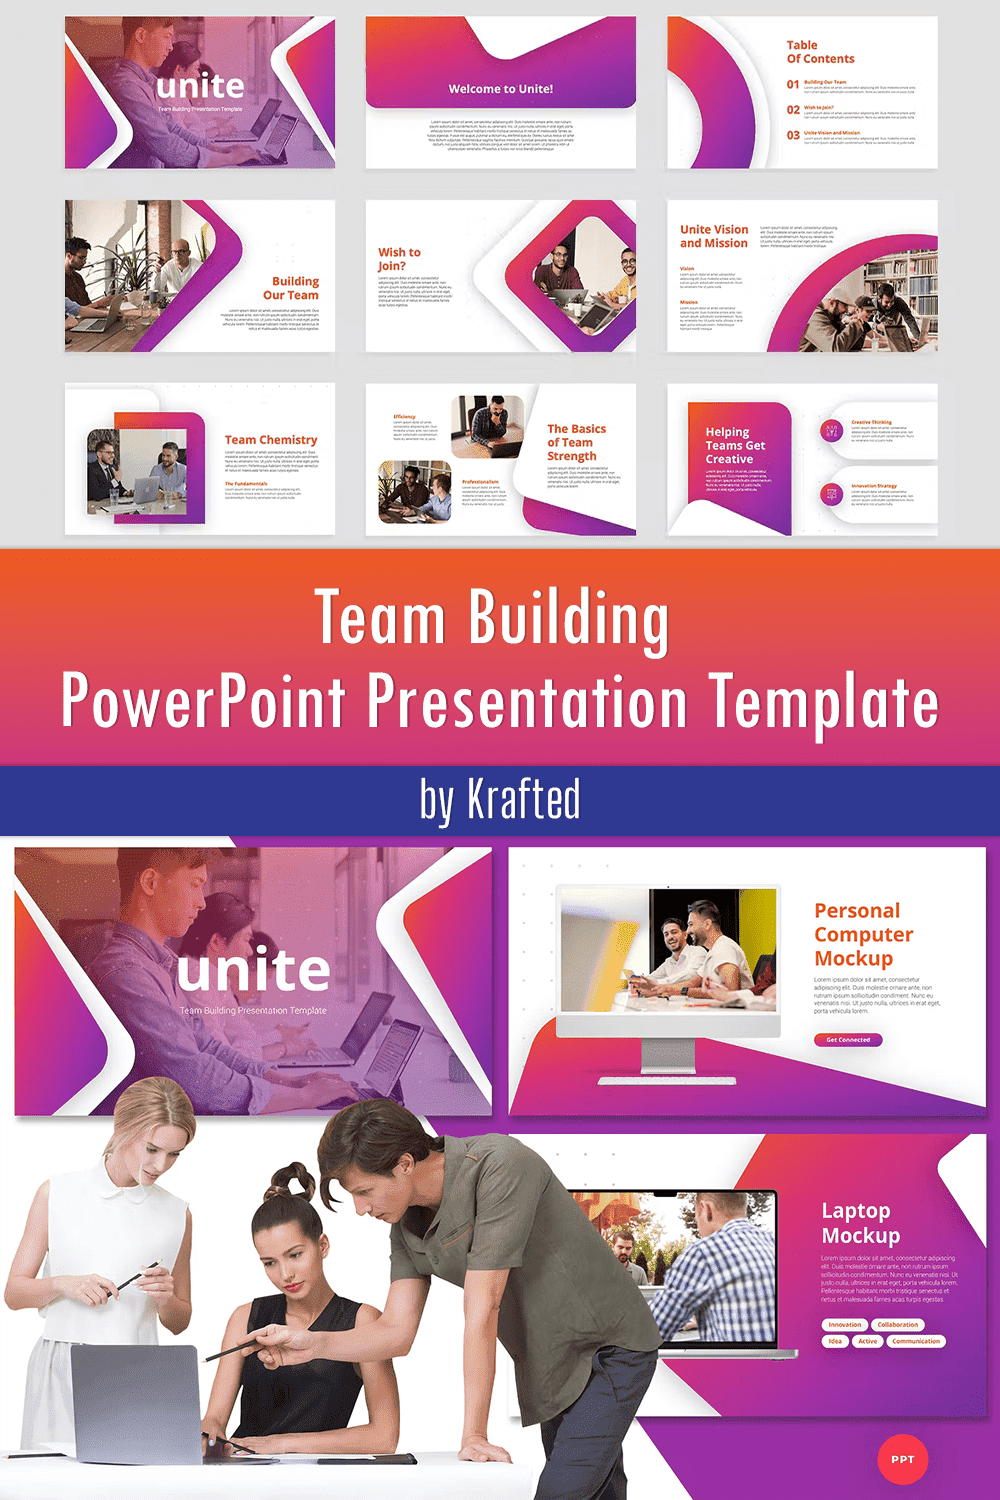 Team building powerpoint presentation template, picture for Pinterest.